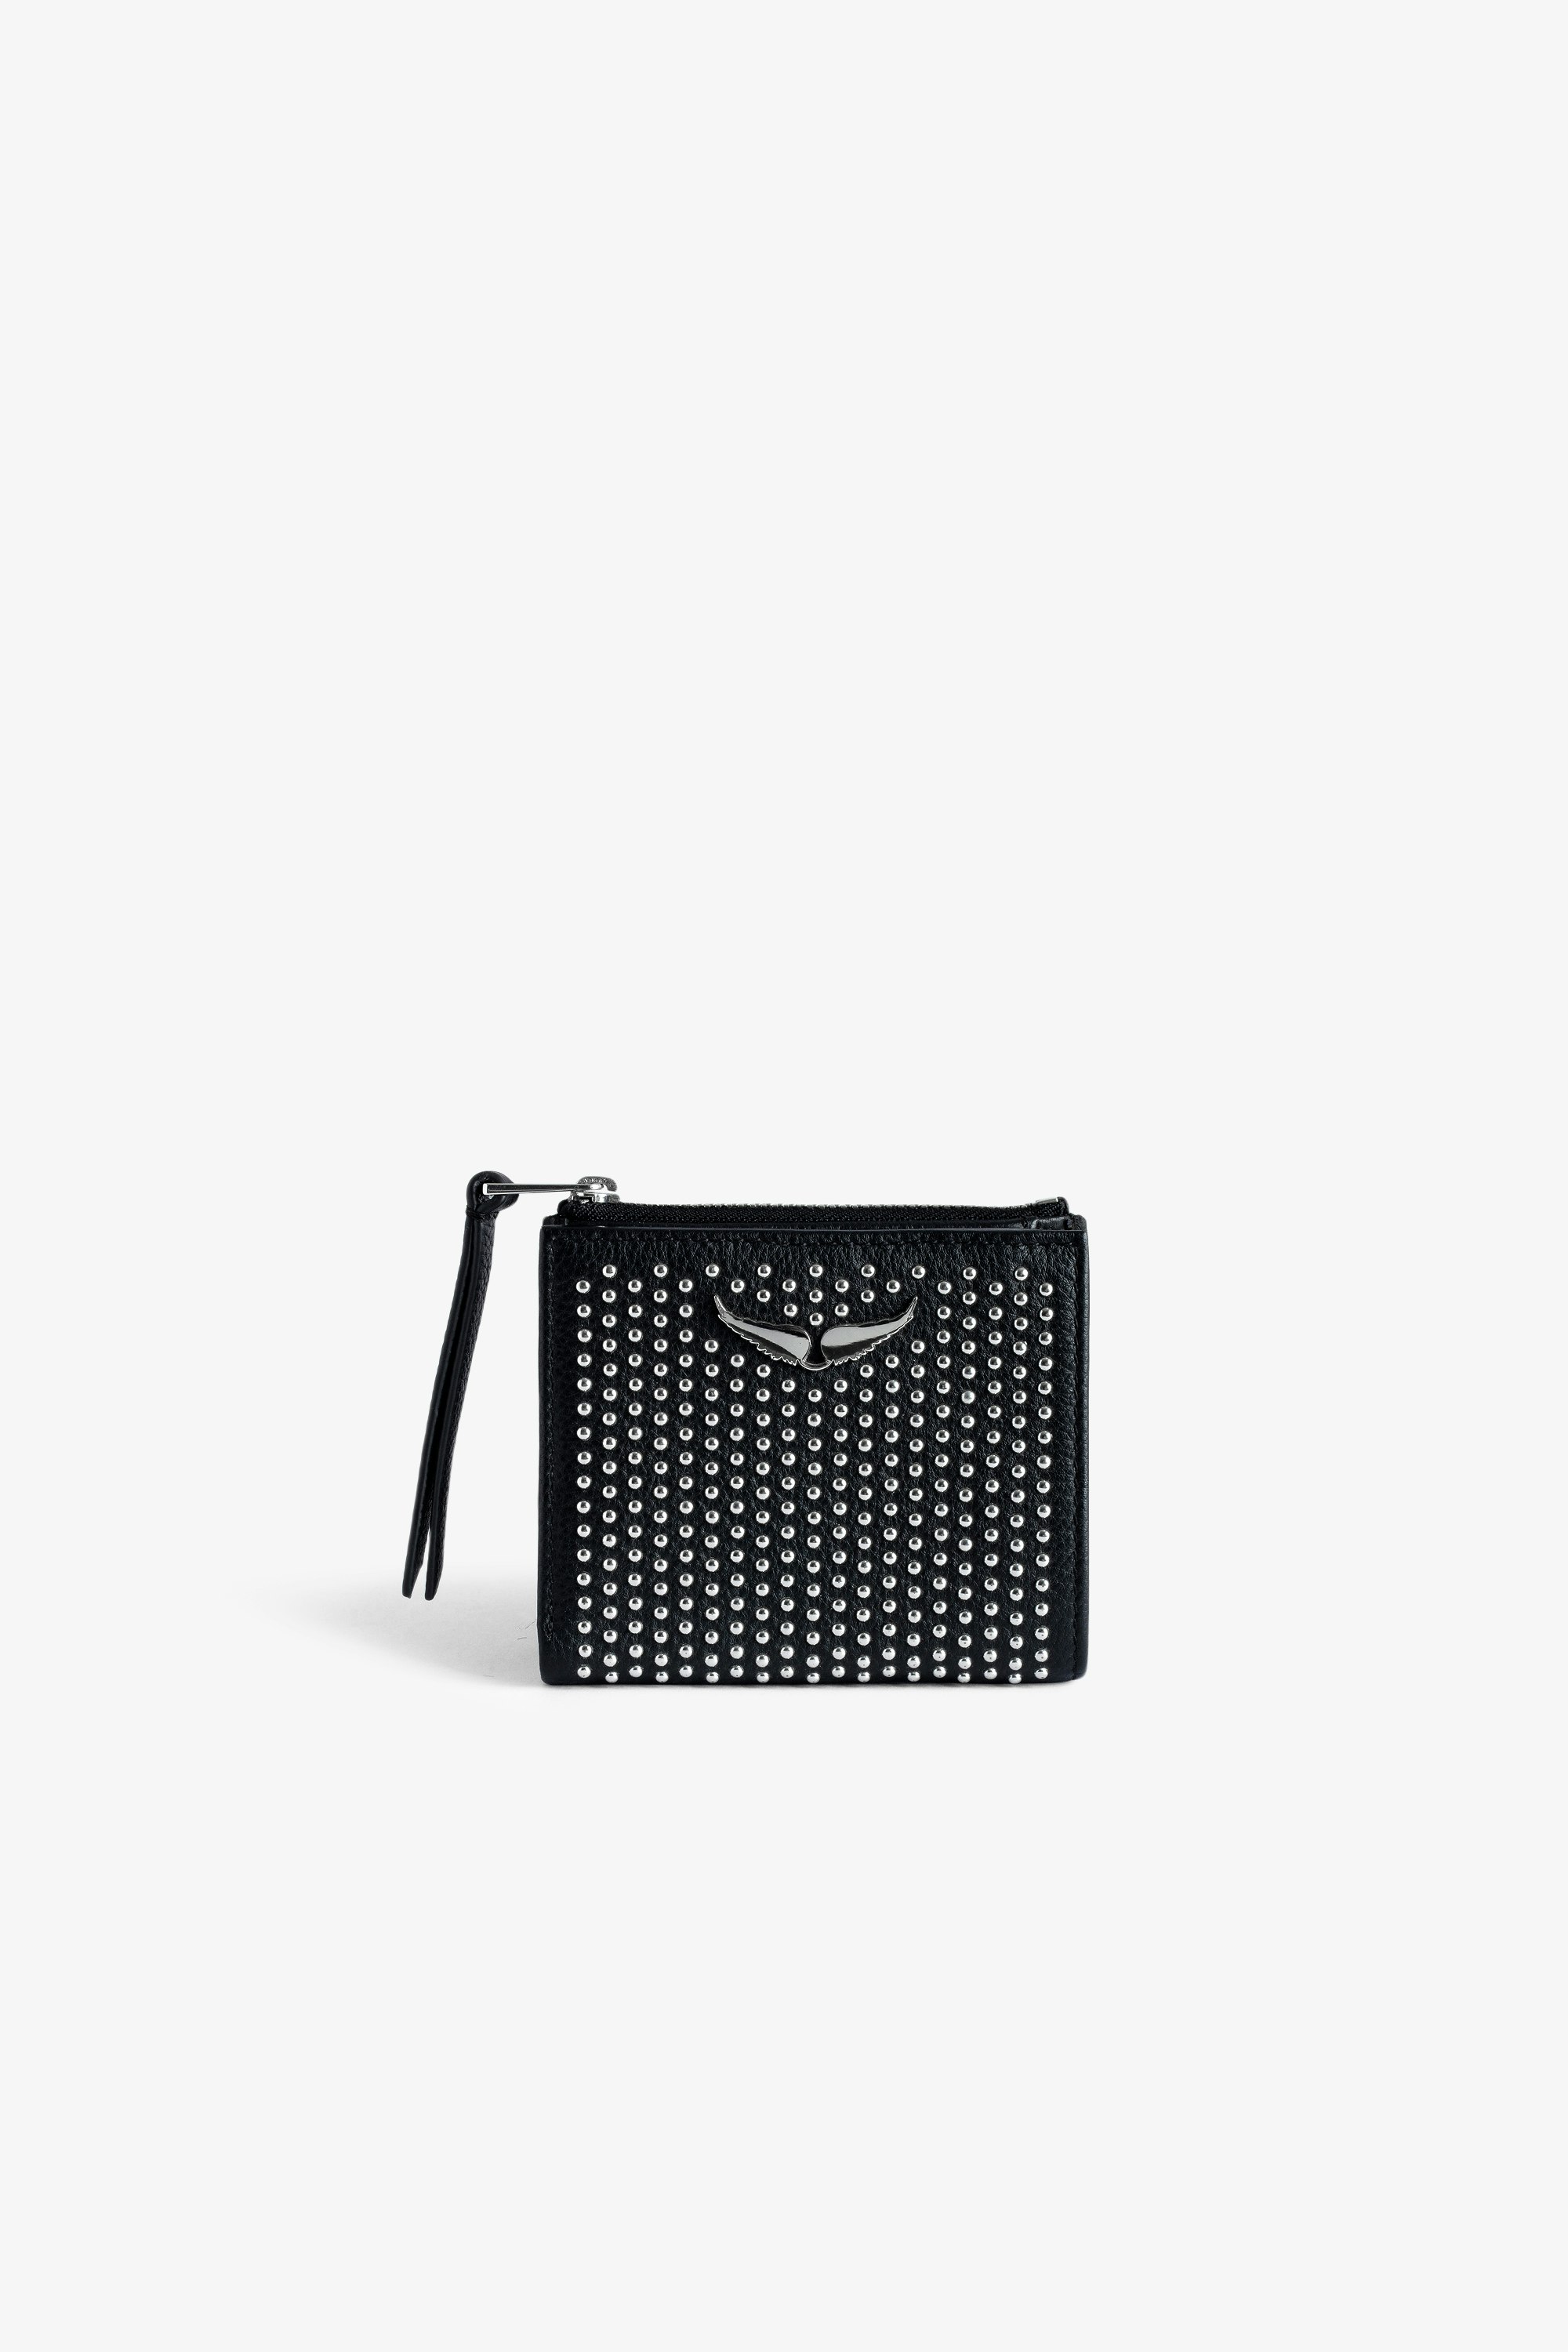 ZV Fold Dotted Swiss Coin Purse - Women’s black grained leather coin purse with studs and wings charm.